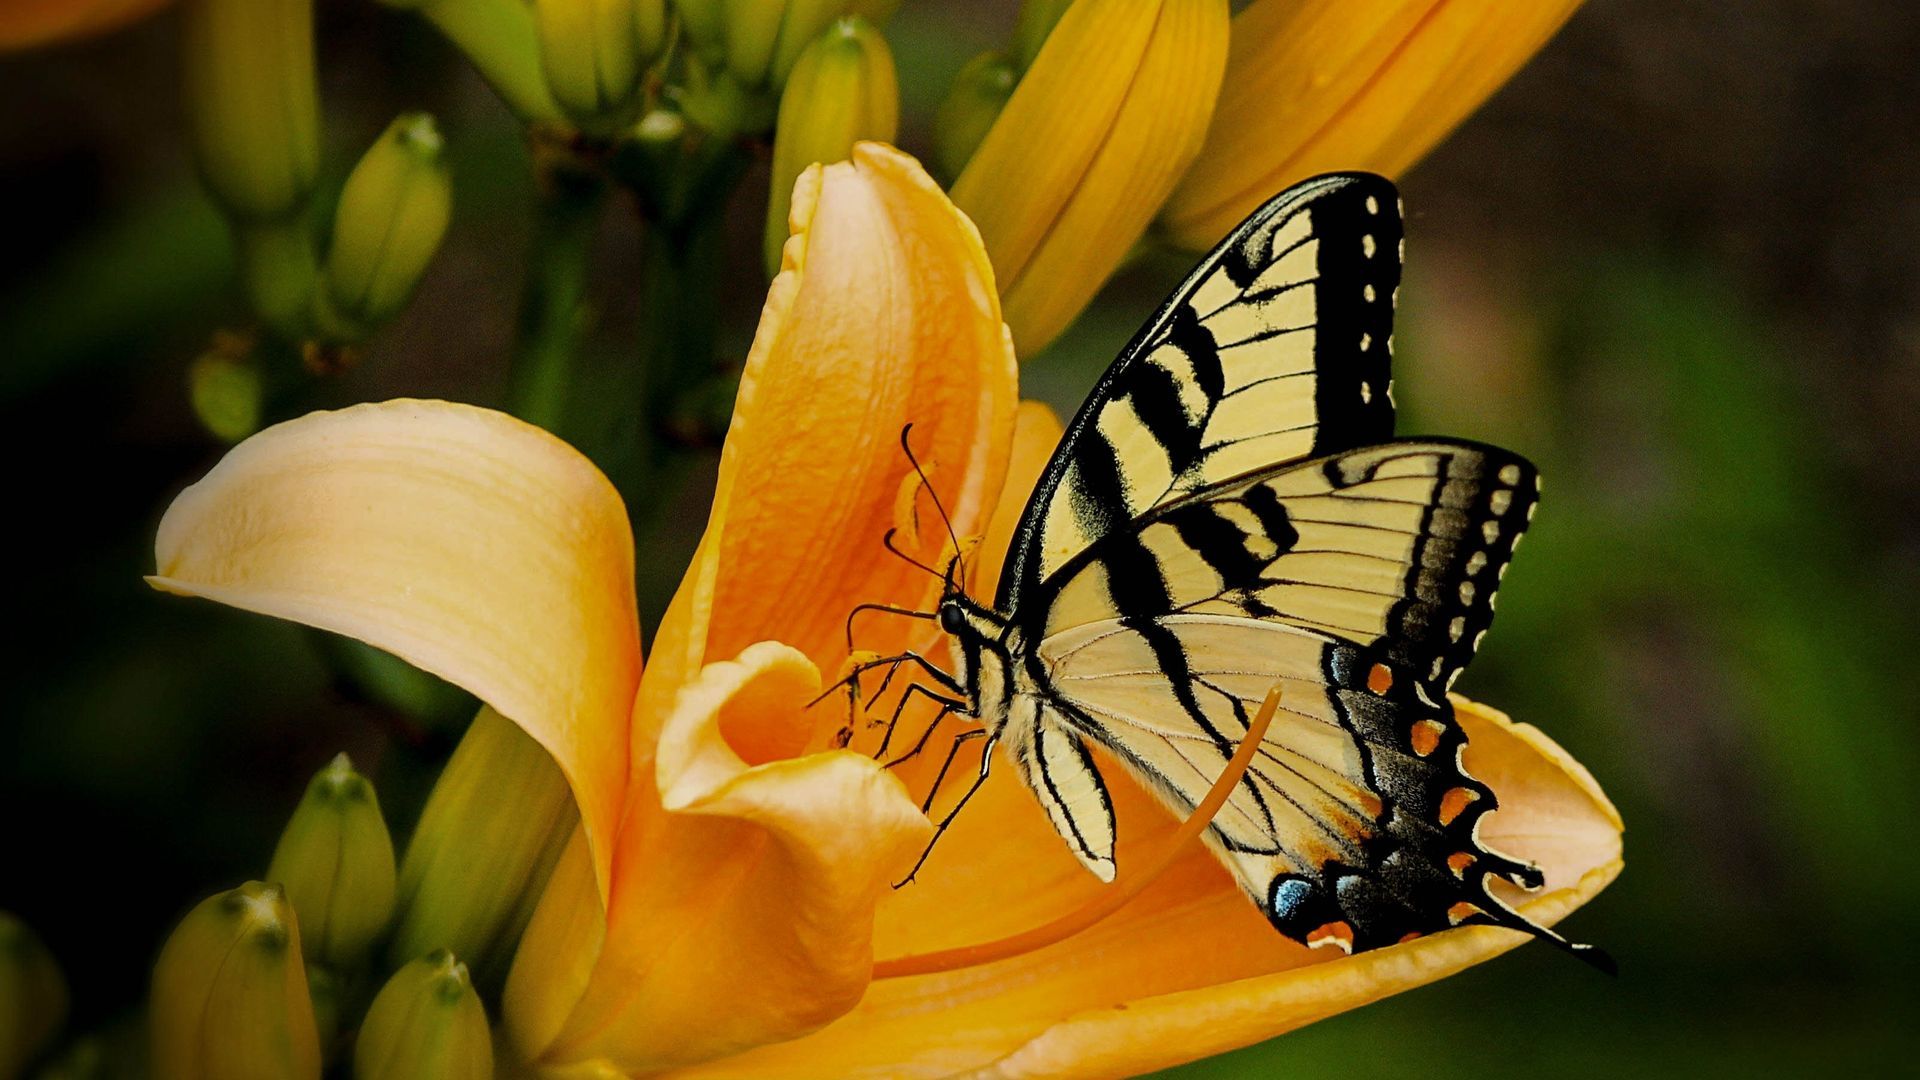 Yellow Flower with Butterfly Wallpaper